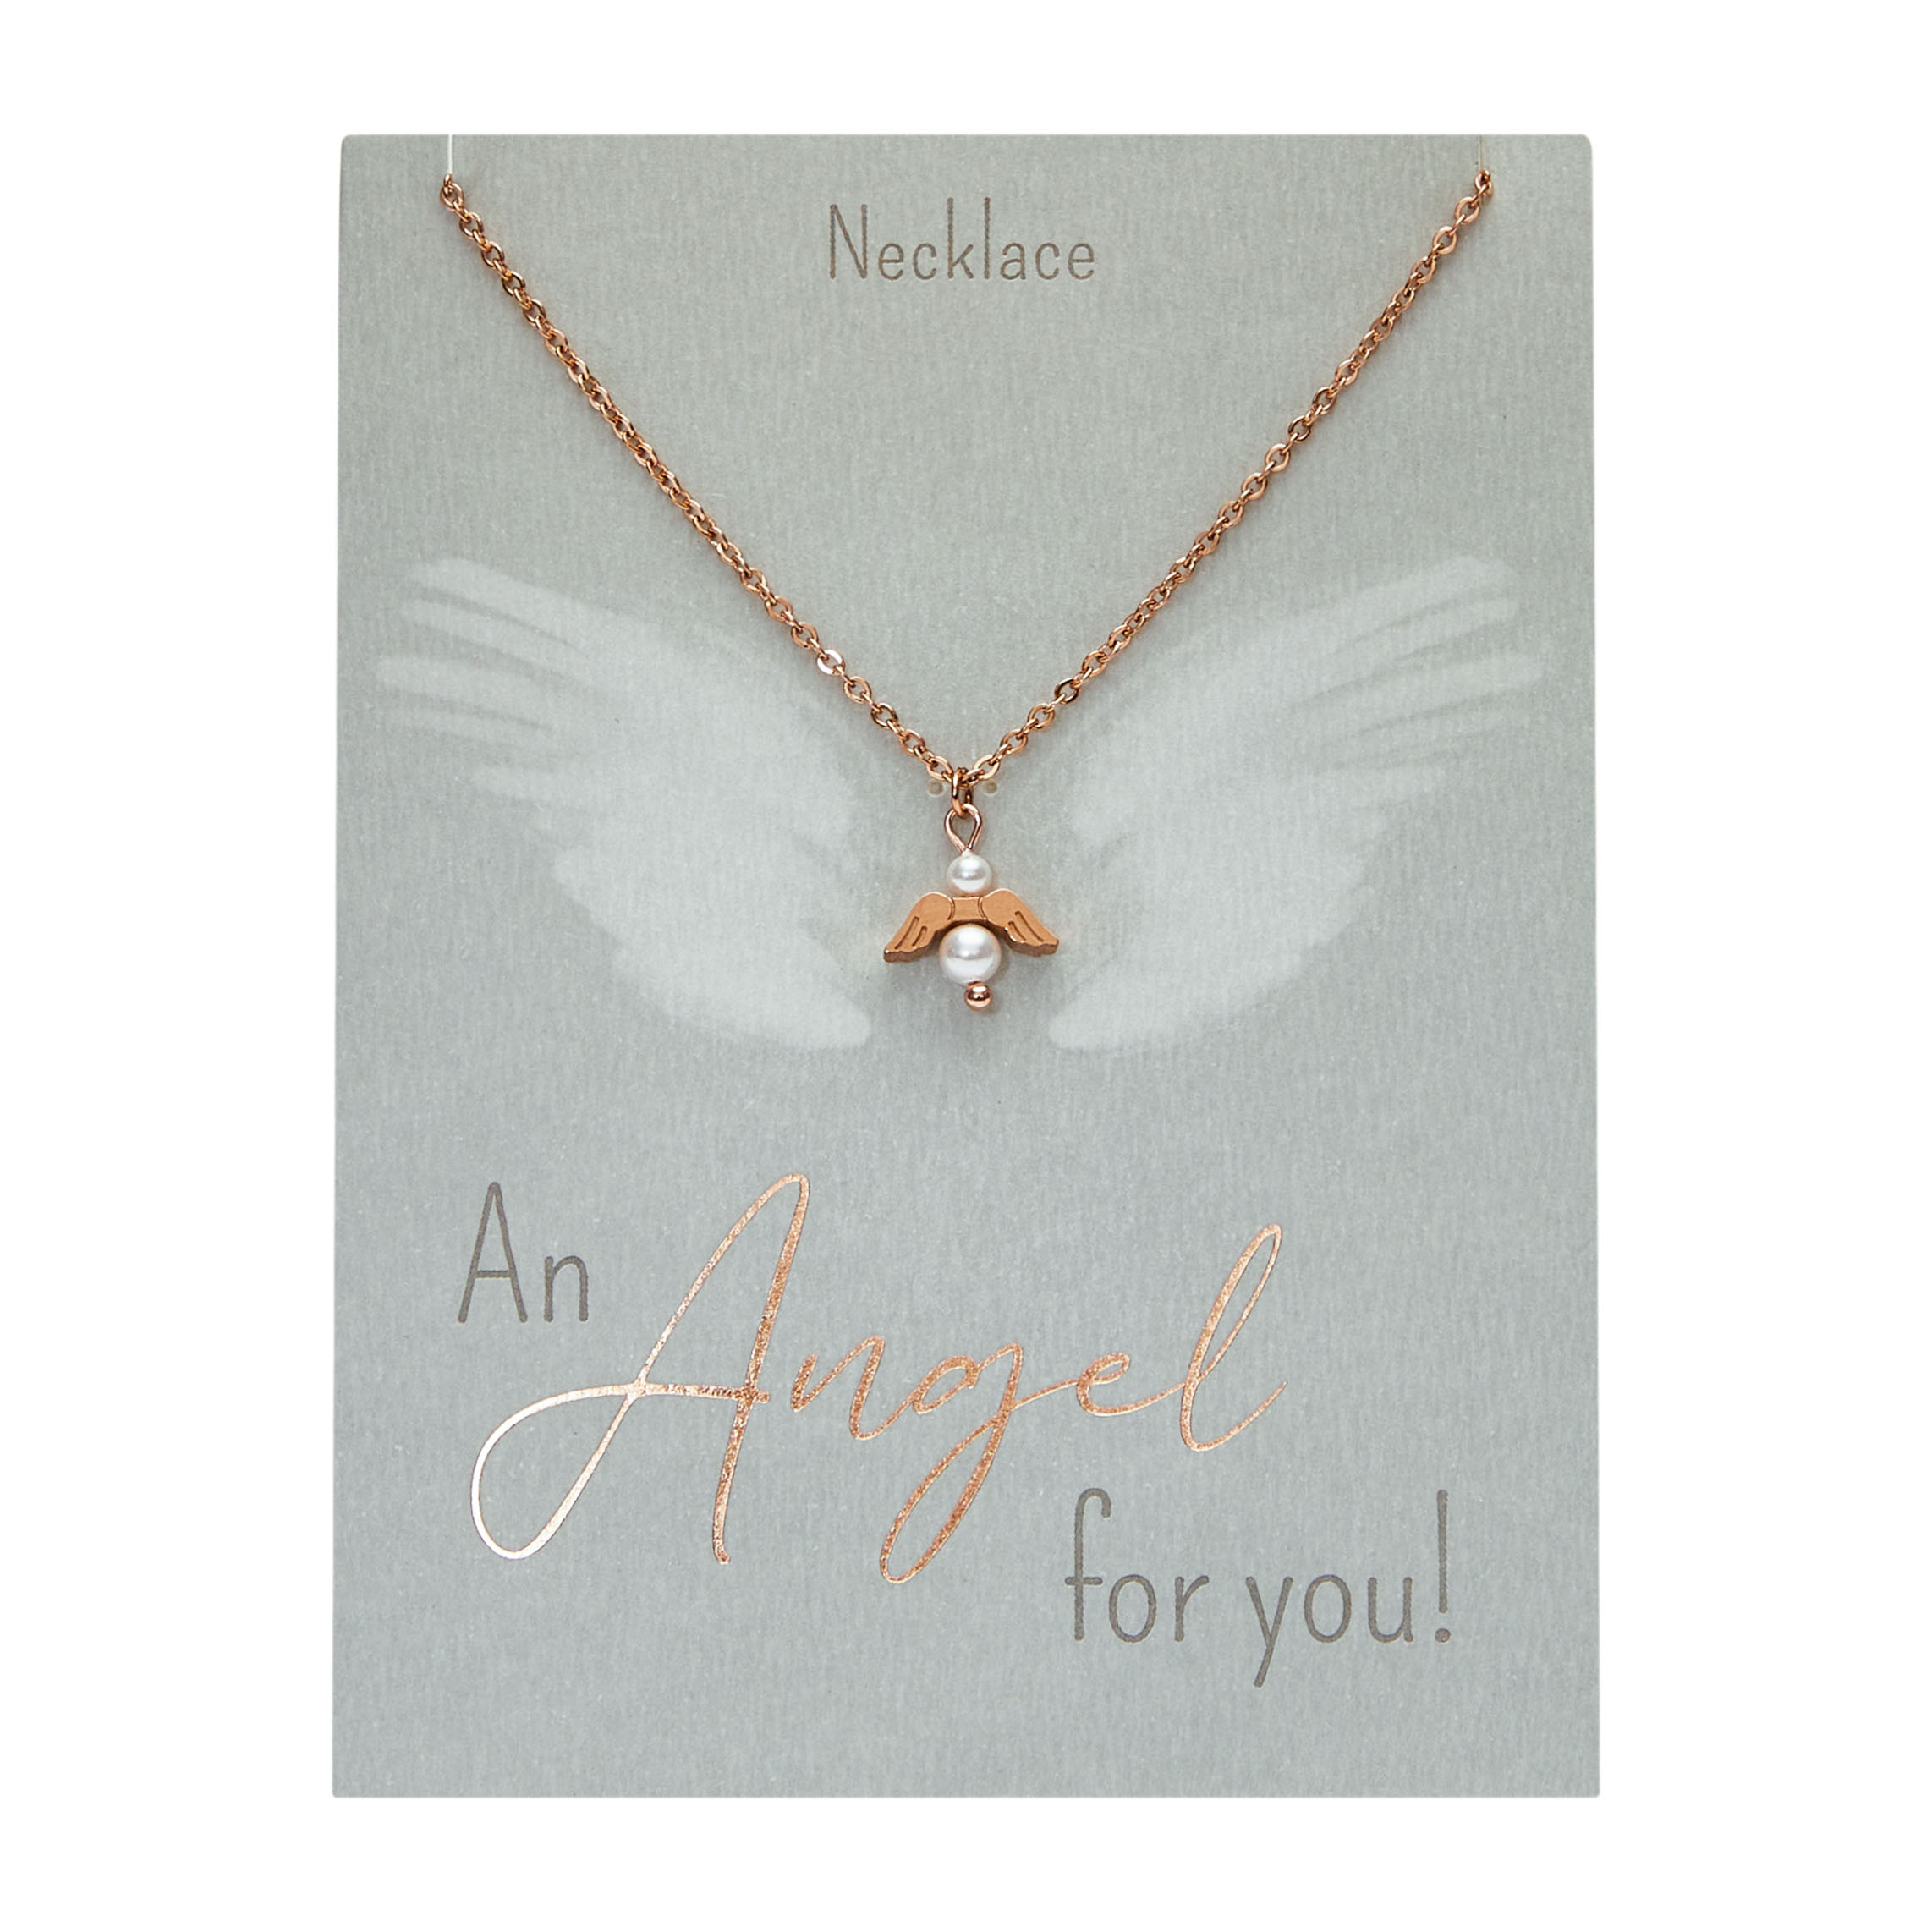 Display  Halsketten "An Angel for you"